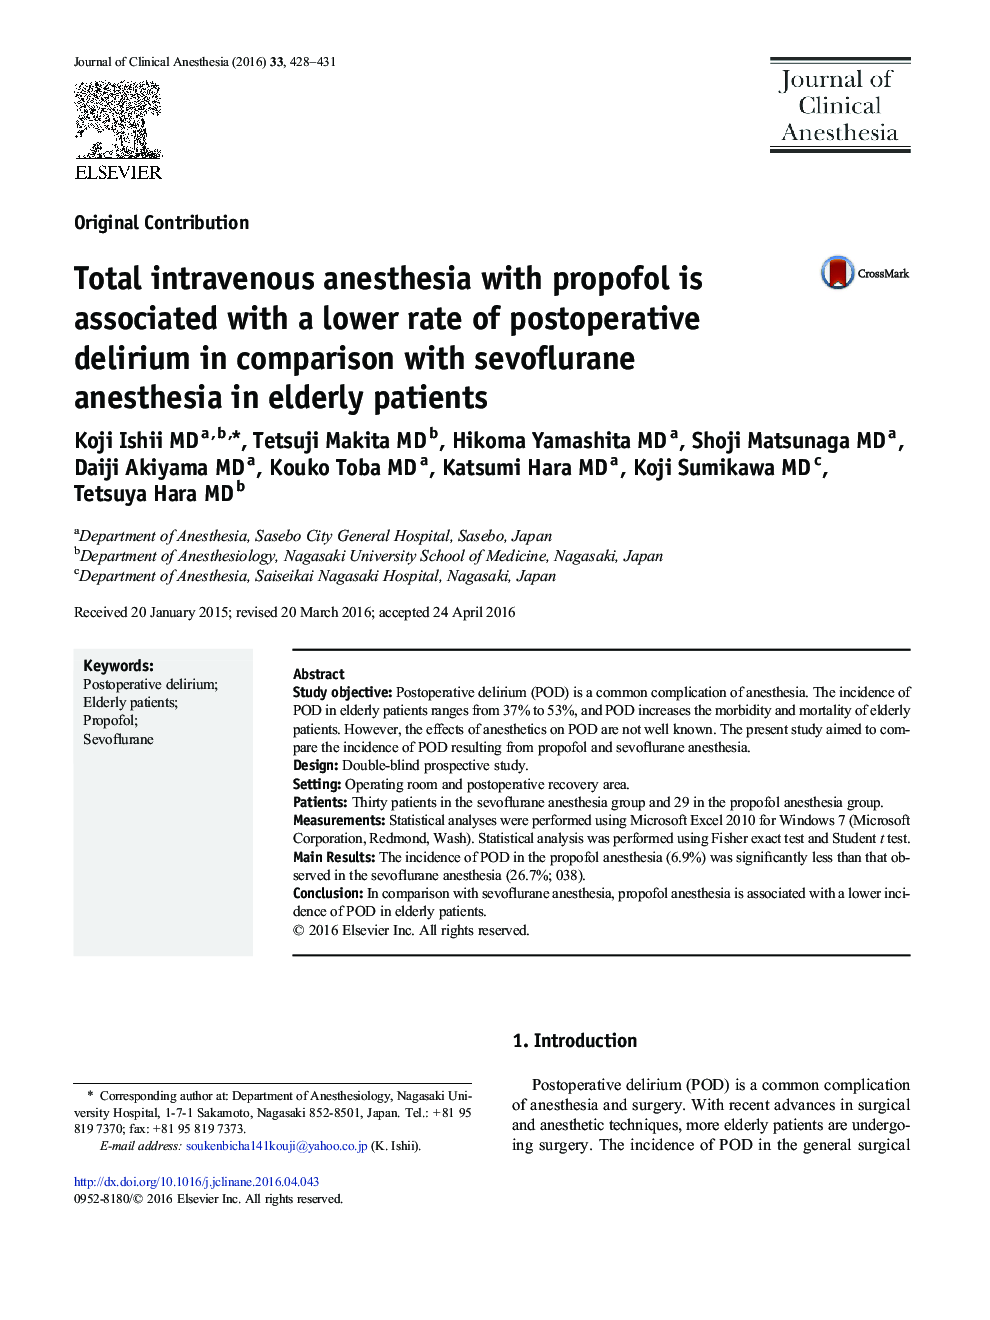 Total intravenous anesthesia with propofol is associated with a lower rate of postoperative delirium in comparison with sevoflurane anesthesia in elderly patients